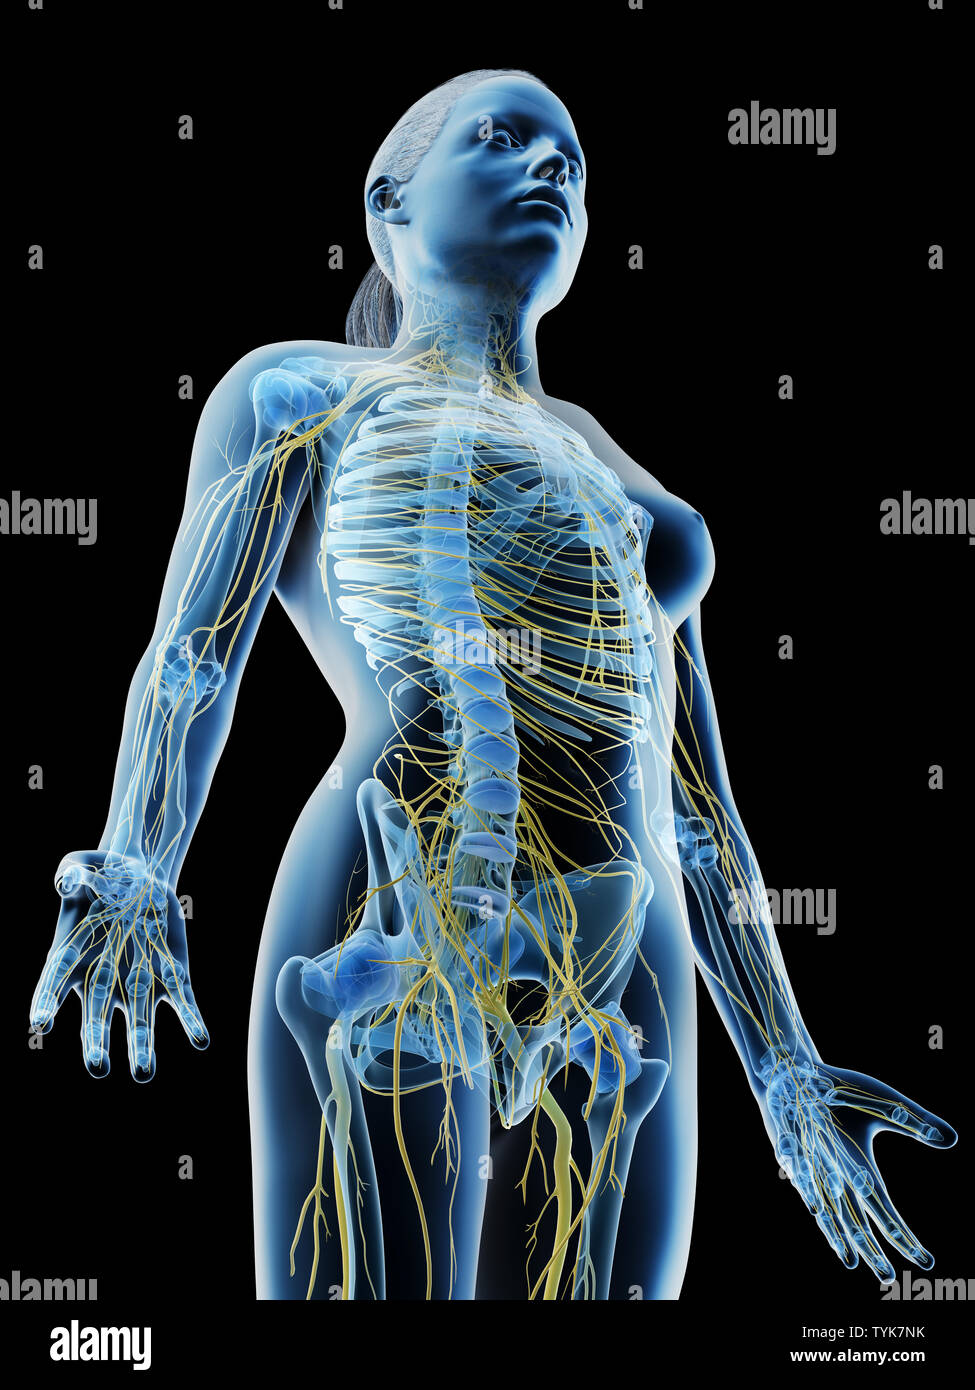 Thoracic Nerve Stock Photos & Thoracic Nerve Stock Images - Page 2 ...